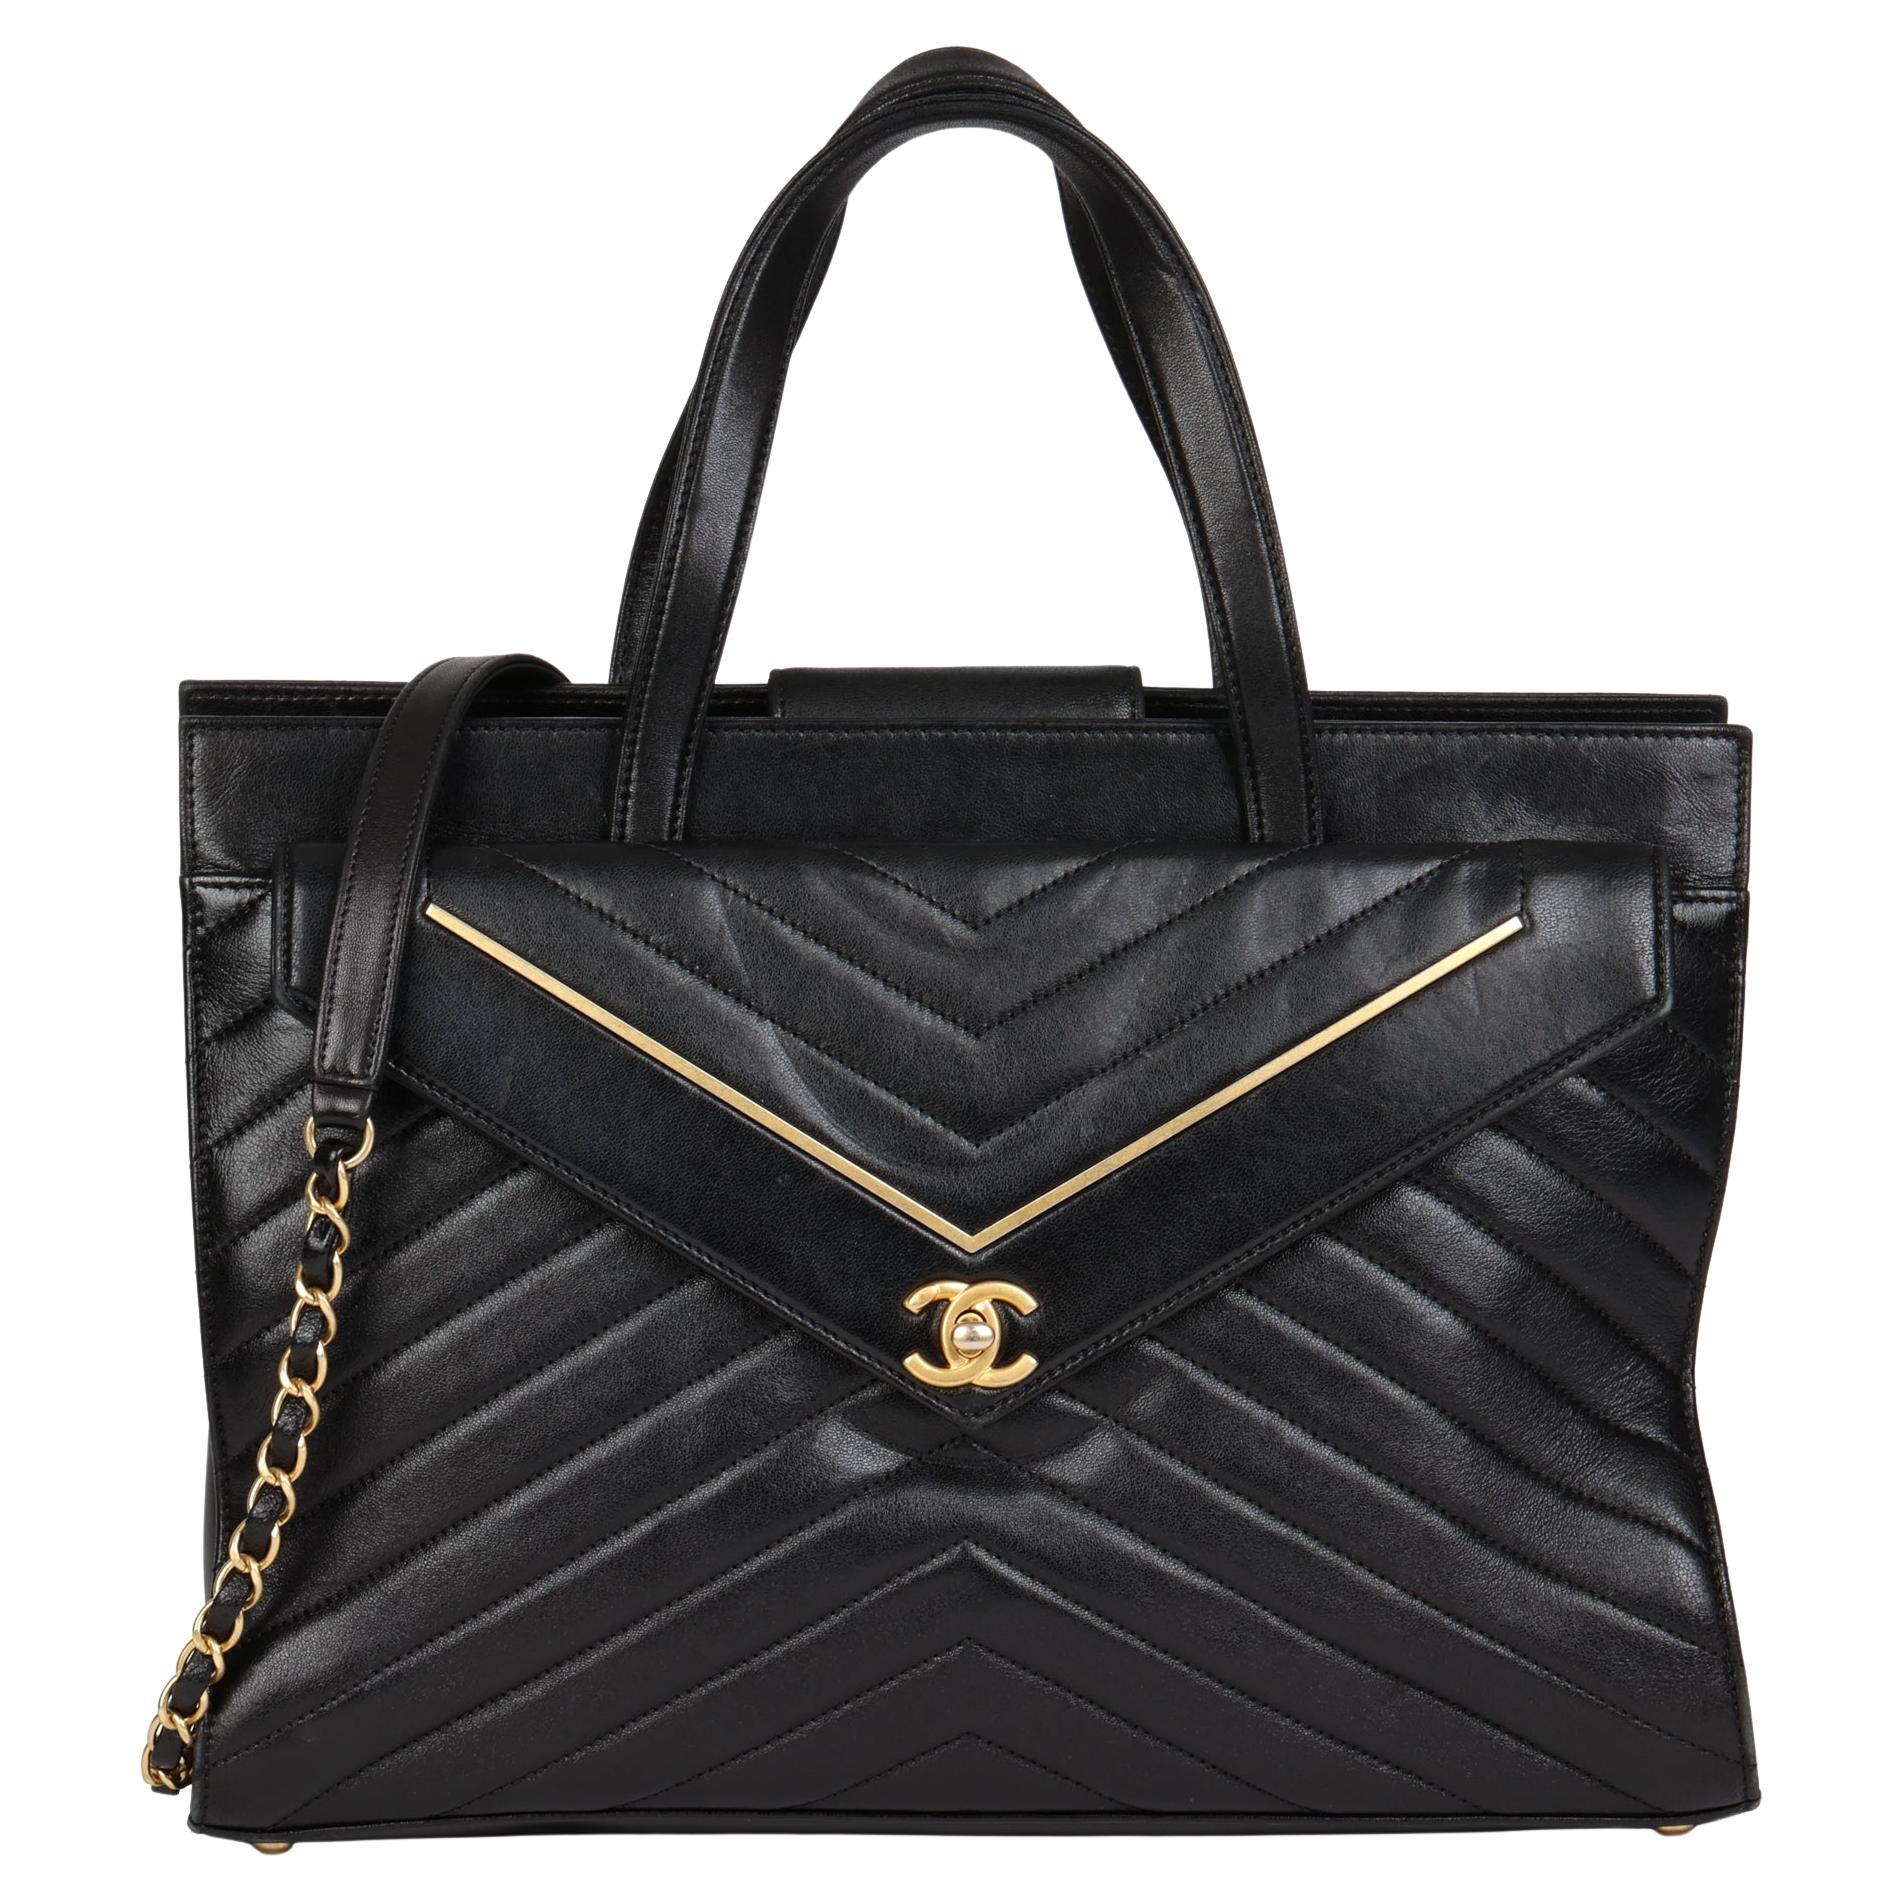 CHANEL Black Chevron Quilted Lambskin Classic Shoulder Tote